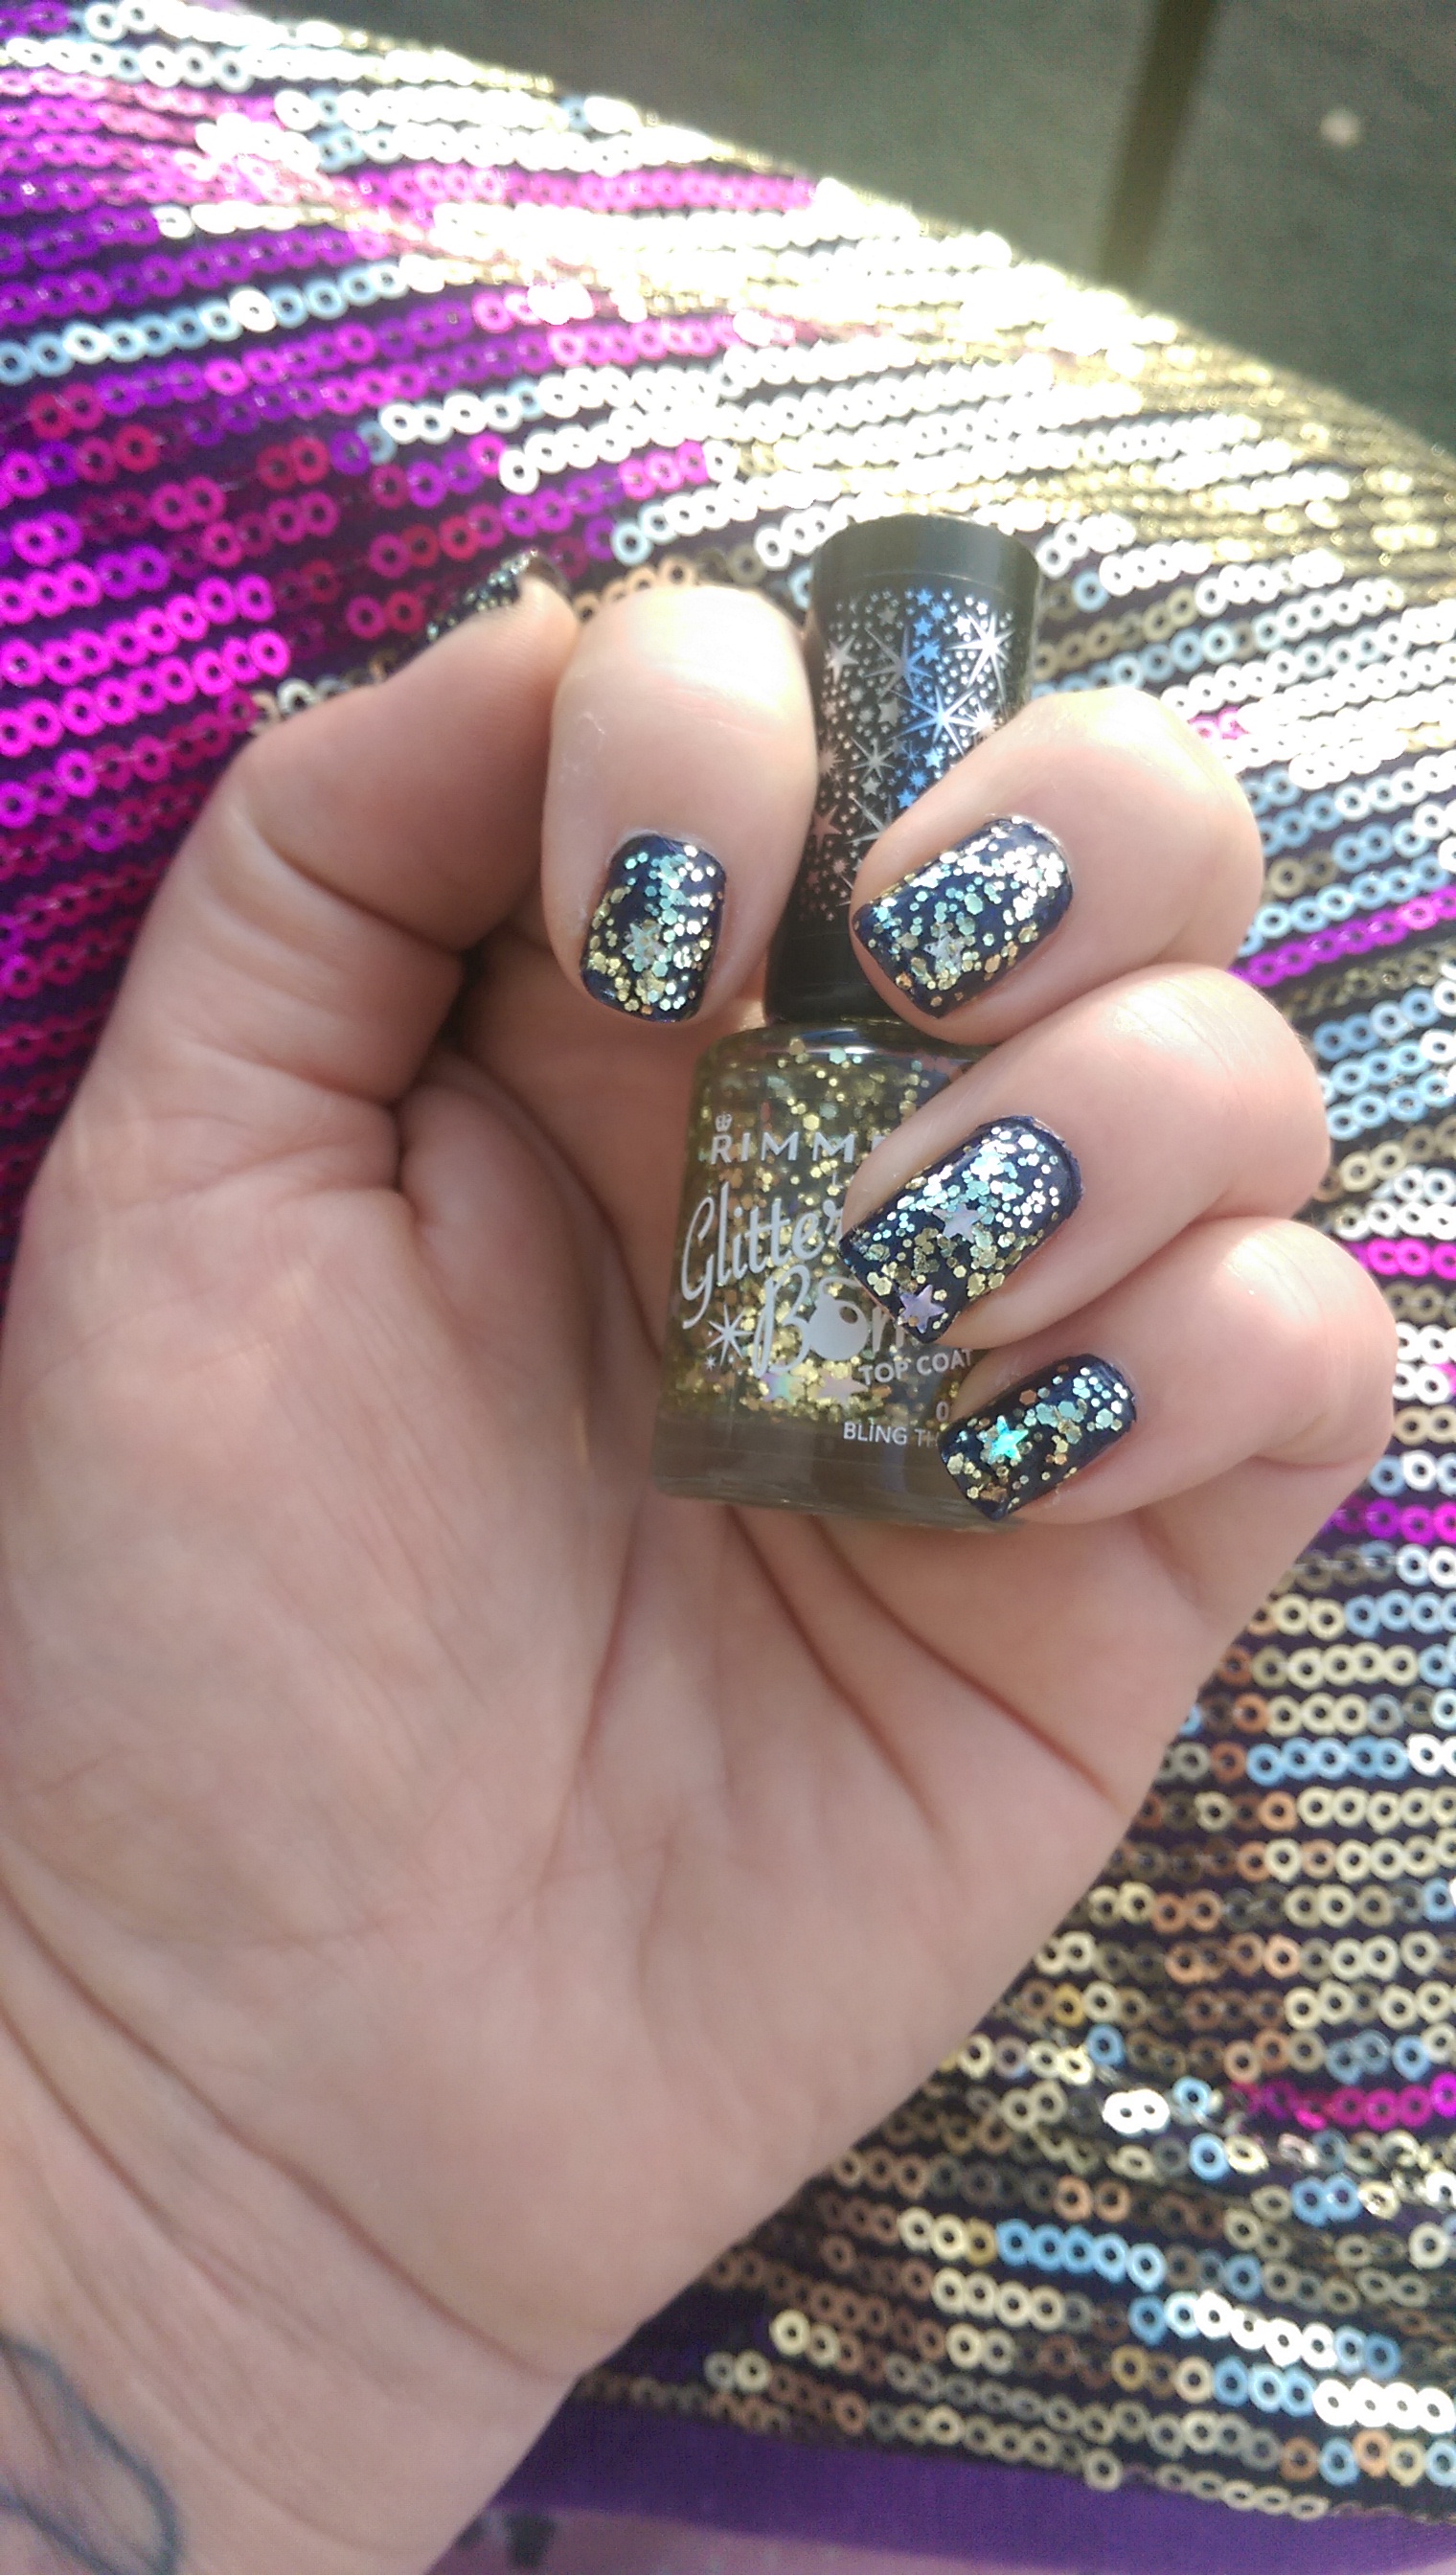 Christmas is over but is it time to ditch the glitter